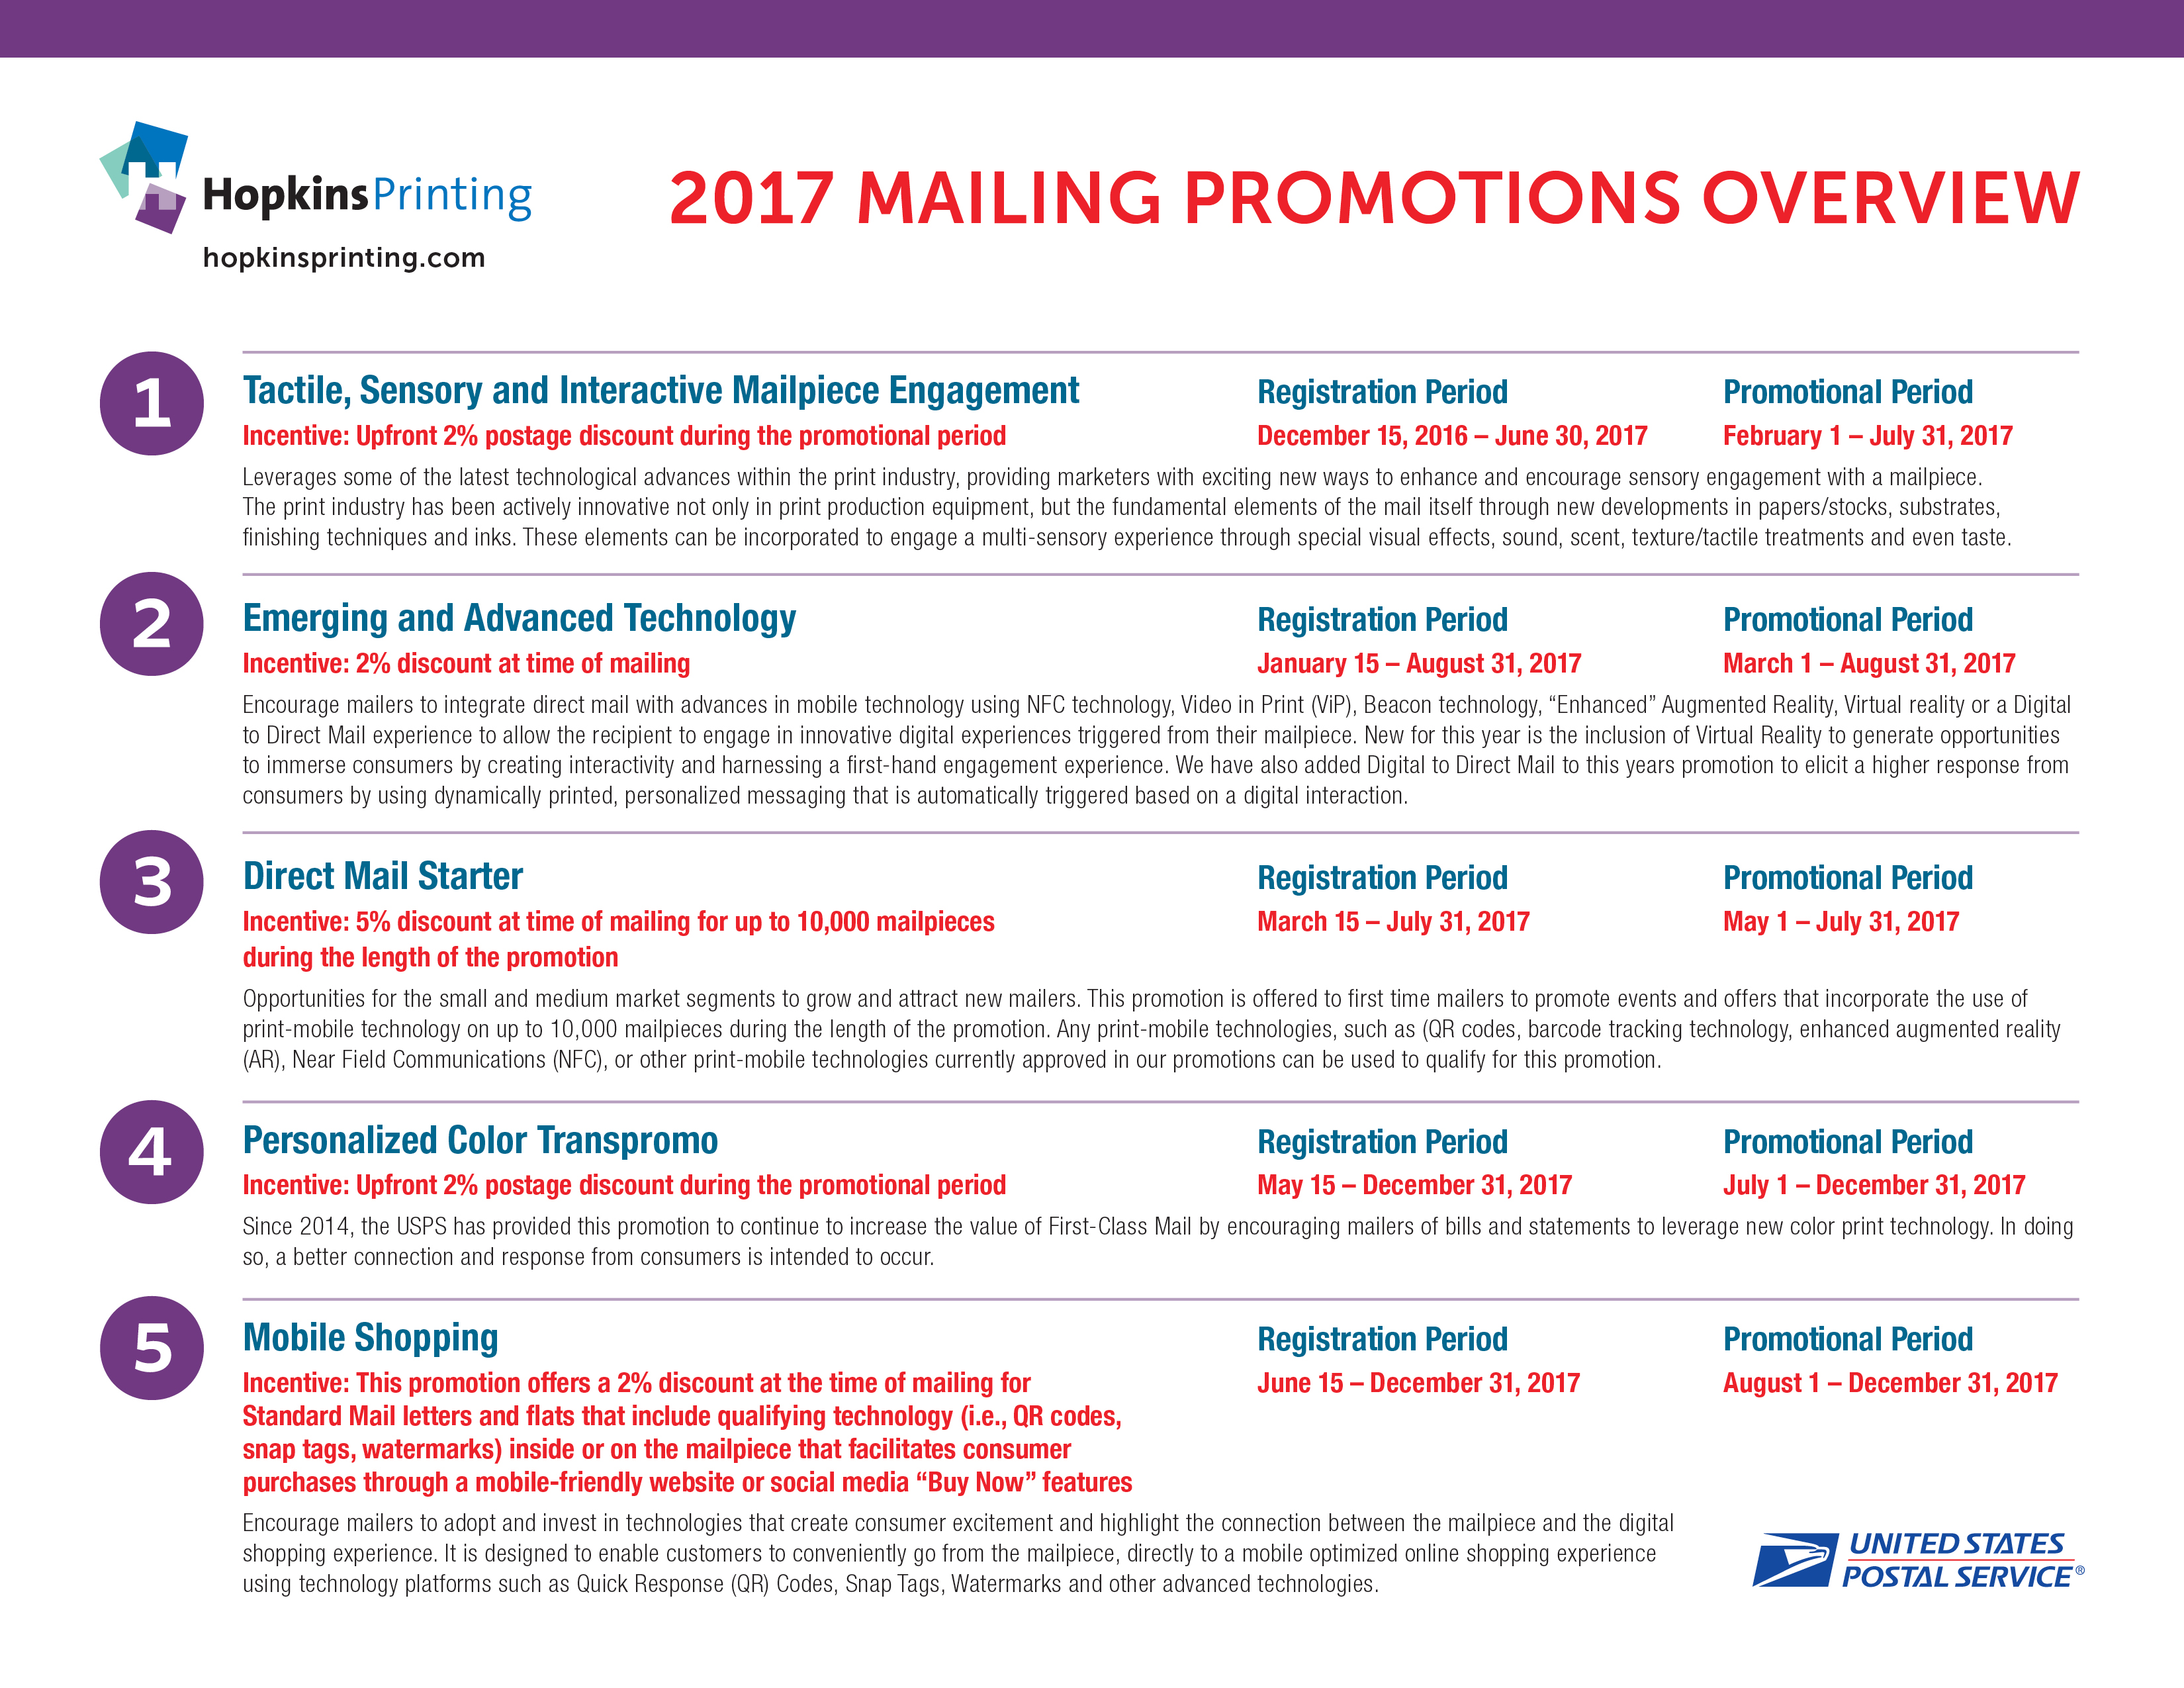 2017 USPS Mailing guide